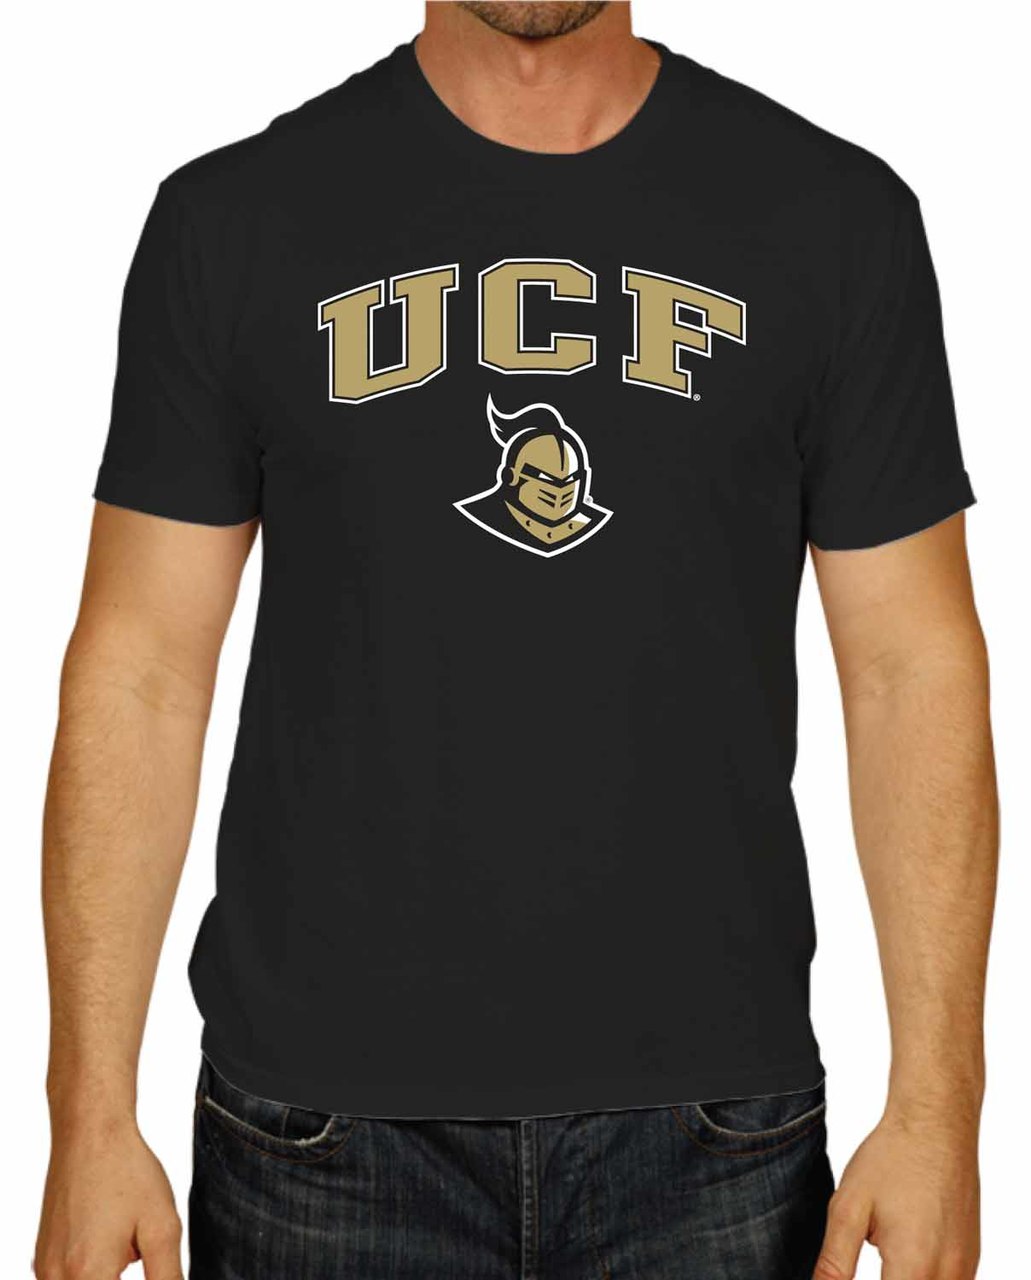 Central Florida Knights NCAA Adult Gameday Cotton T-Shirt - Black